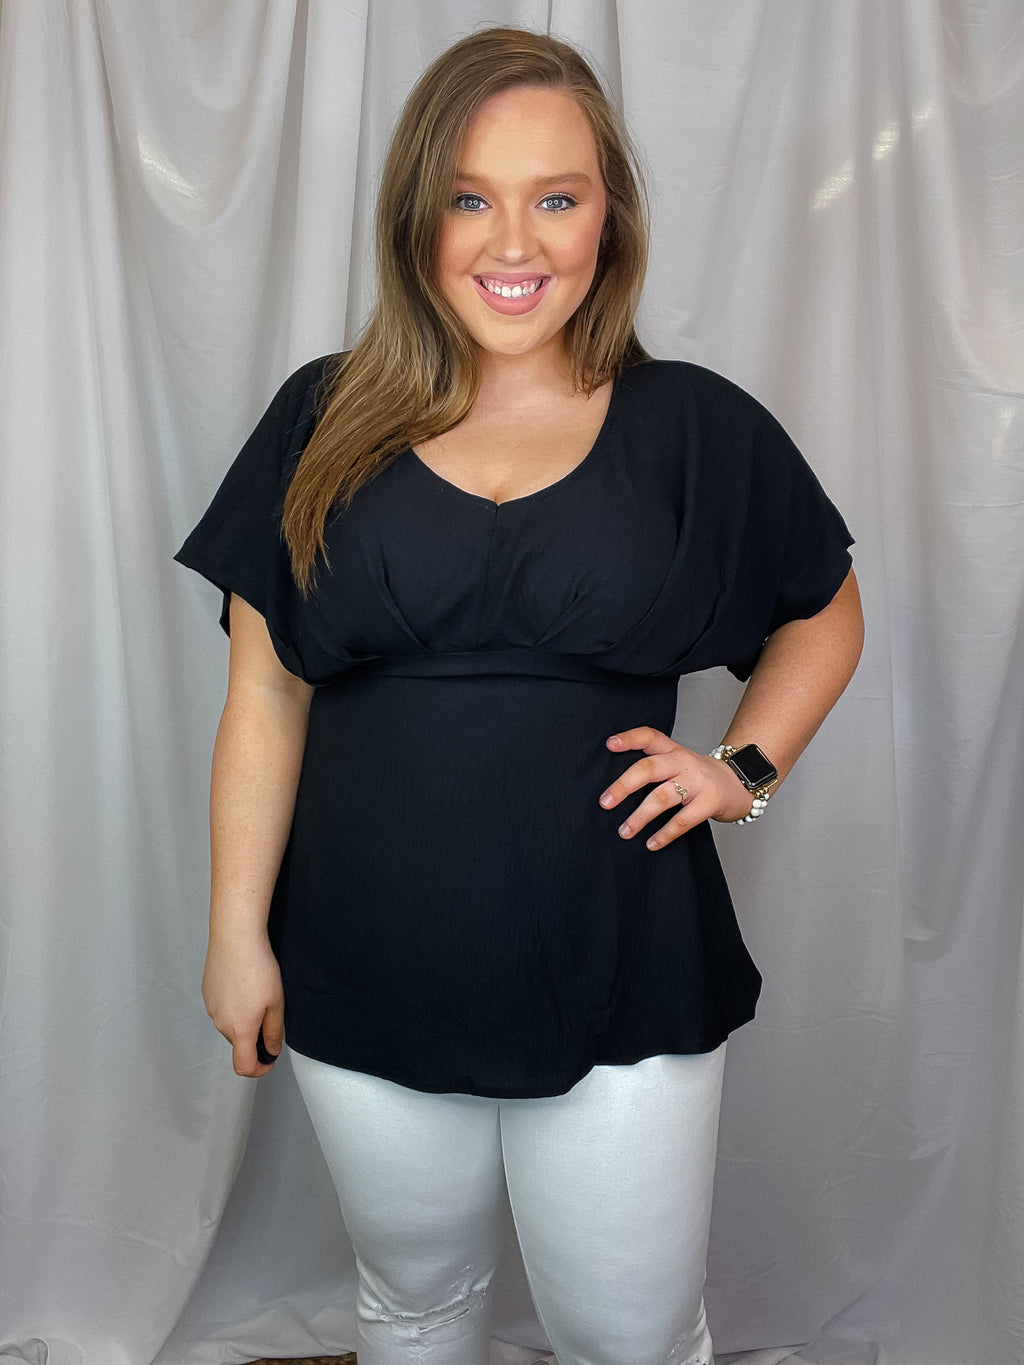 Top features a solid base color, V-neck line, dolman sleeves, pleated detailing and runs true to size!-black